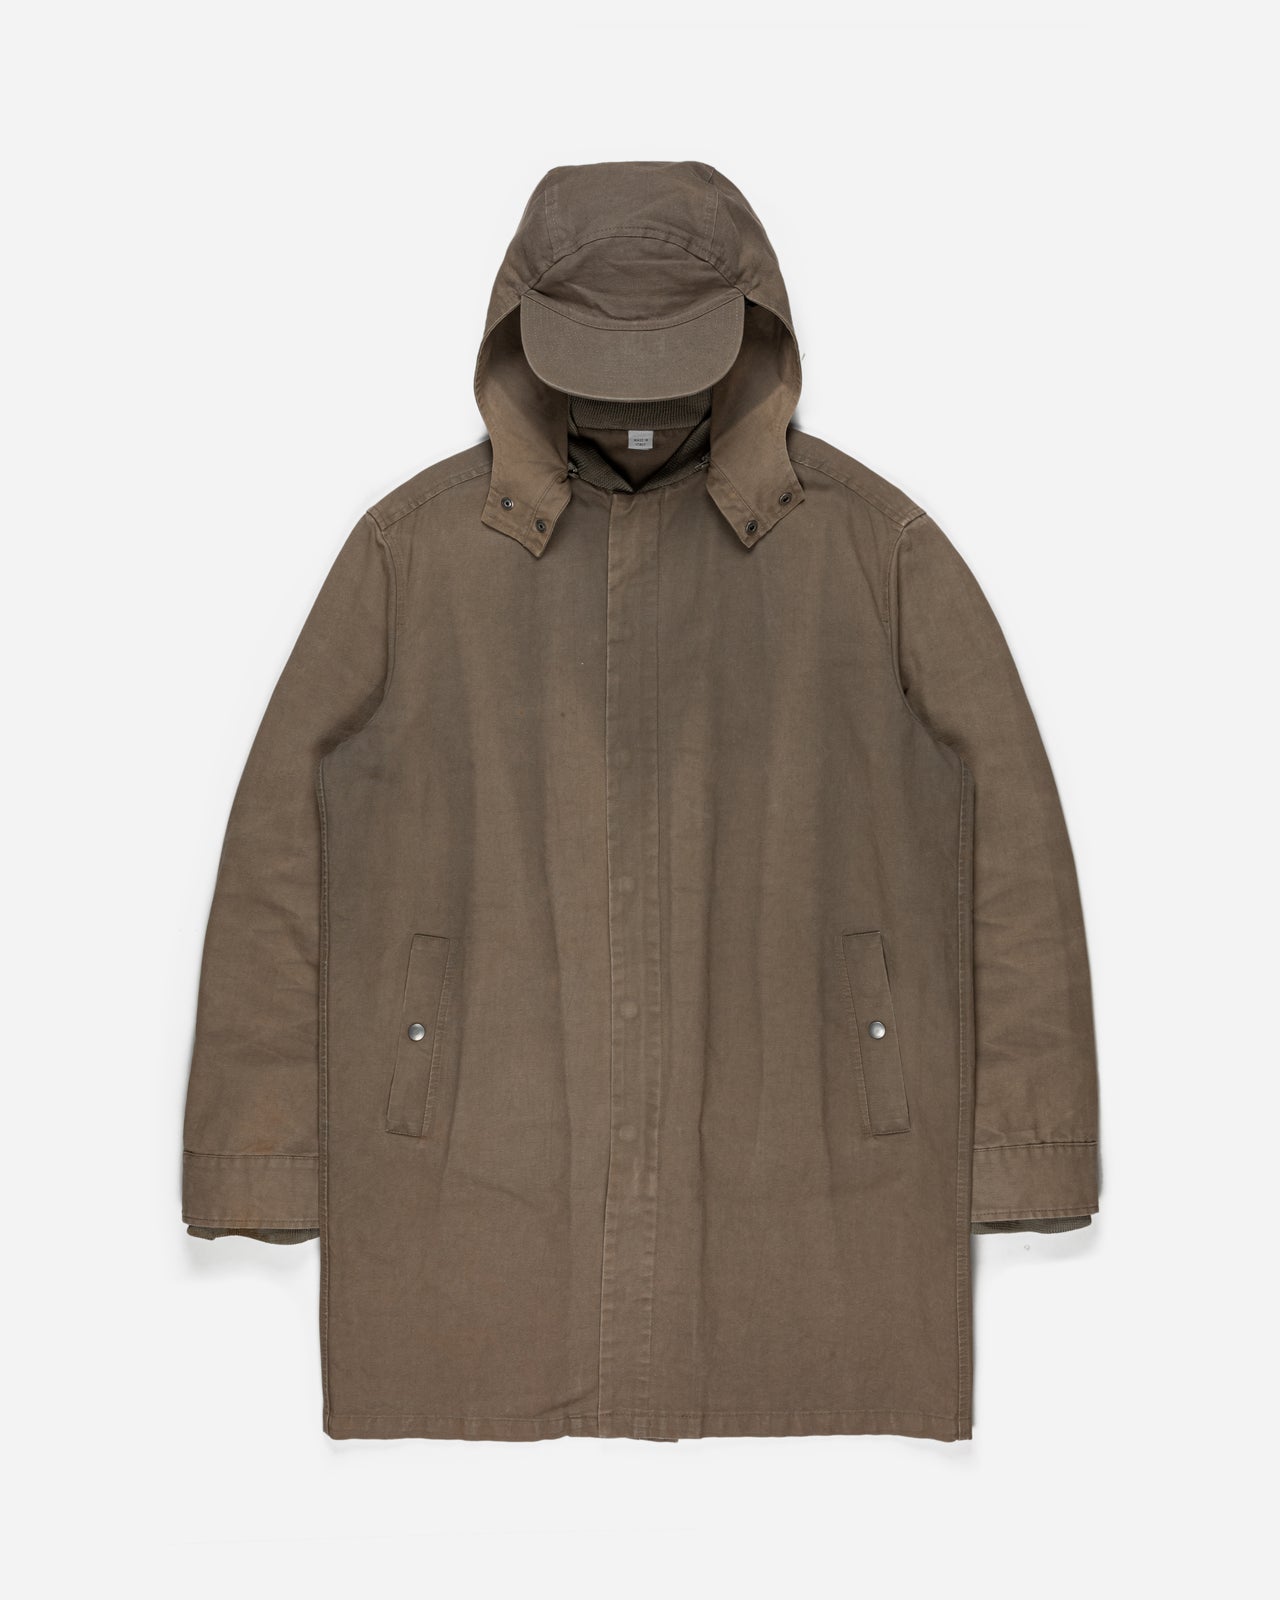 Hussein Chalayan Parka W/ Detachable Brimmed Hood - AW04 "Anthropology Of Solitude"